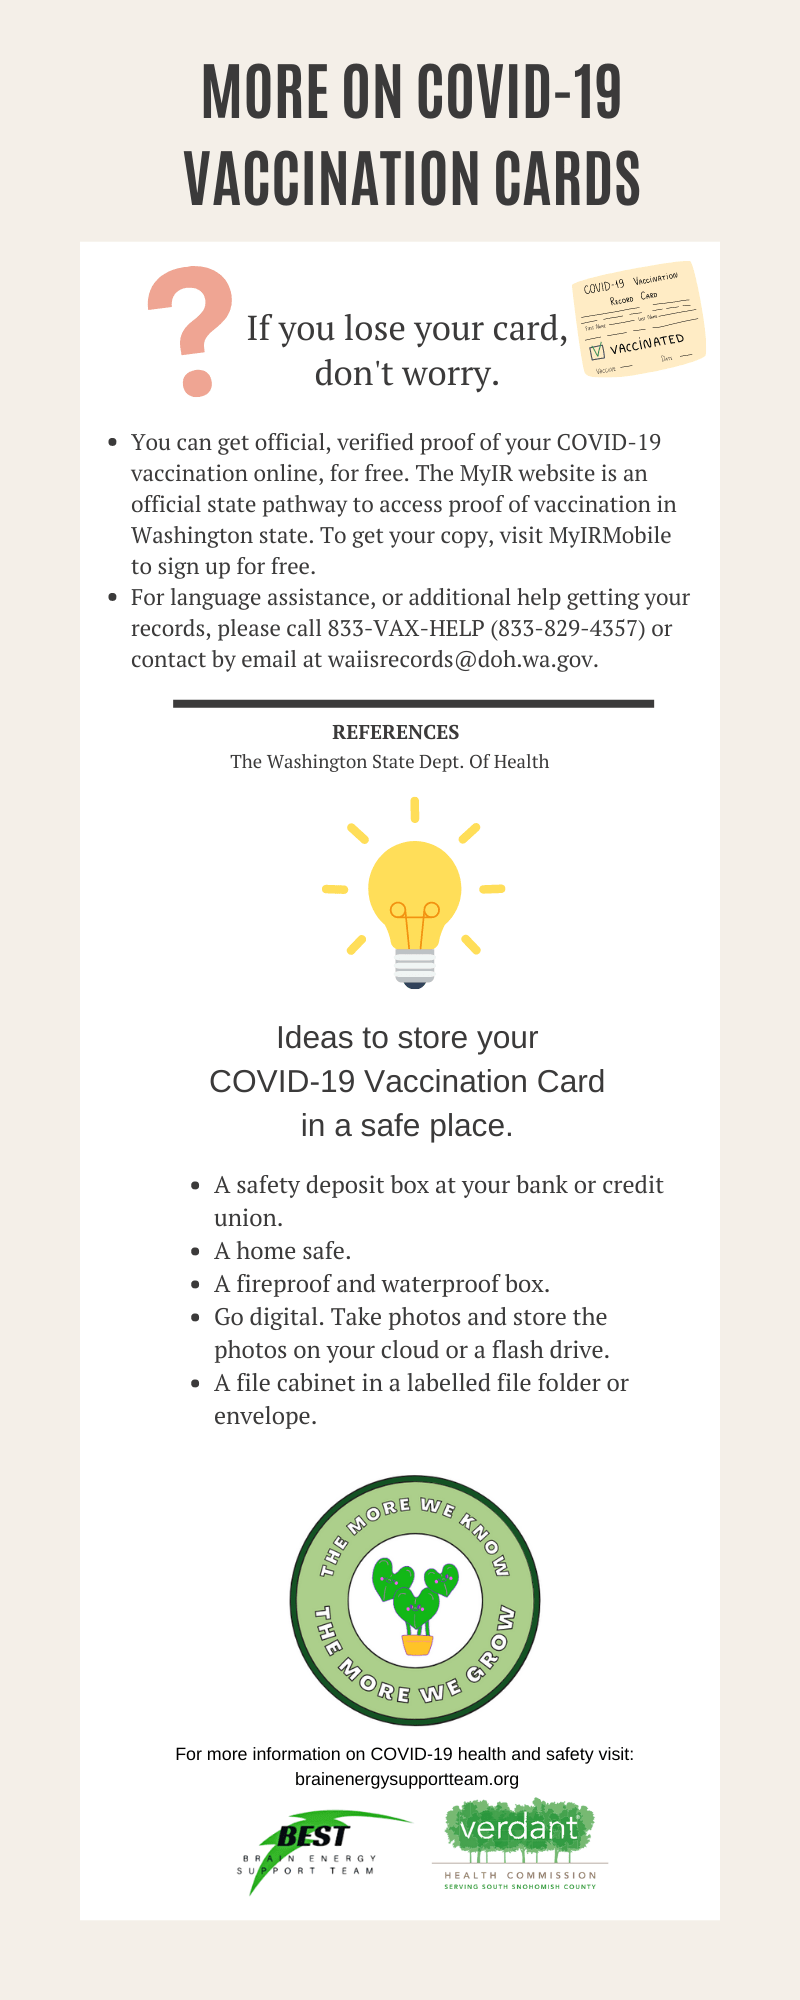 Covid-19 vaccination card safekeeping tips